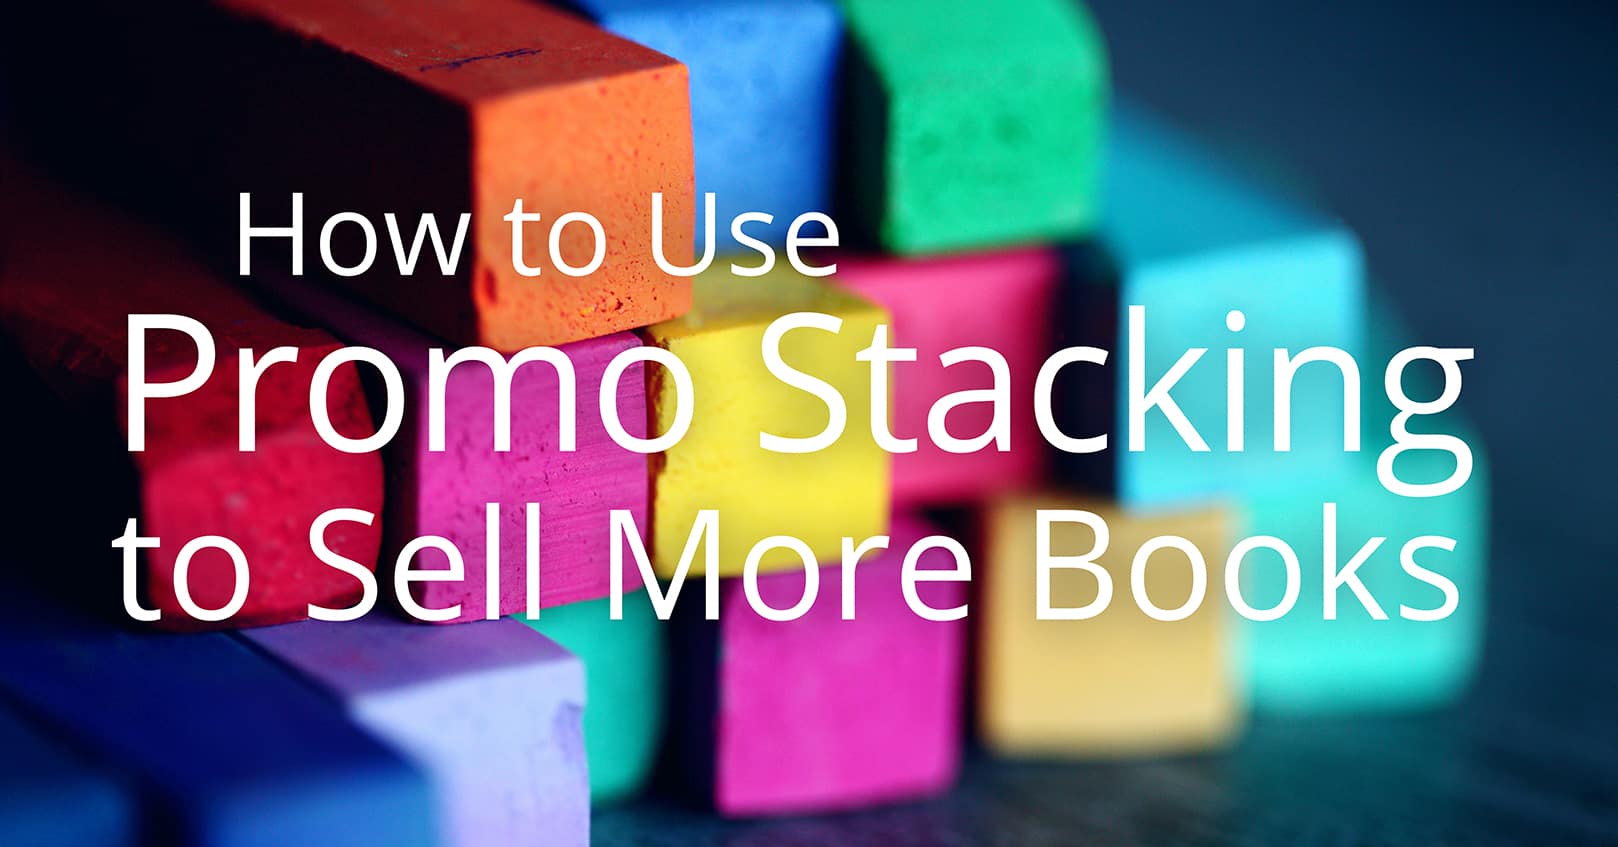 use promo stacking to sell more books